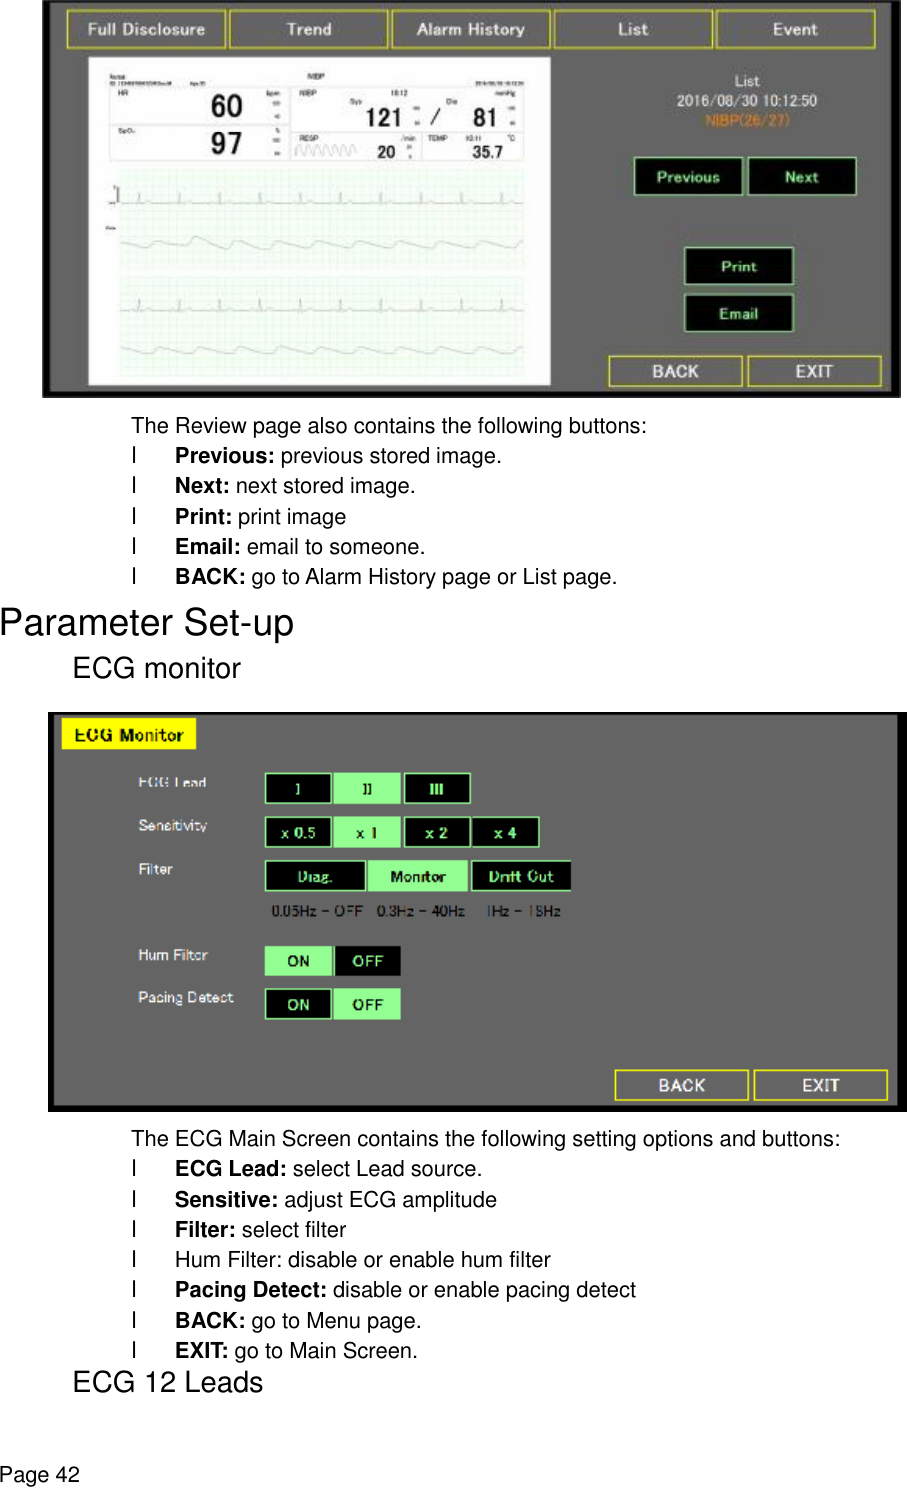    Page 42  The Review page also contains the following buttons: l Previous: previous stored image. l Next: next stored image. l Print: print image l Email: email to someone. l BACK: go to Alarm History page or List page. Parameter Set-up ECG monitor  The ECG Main Screen contains the following setting options and buttons: l ECG Lead: select Lead source. l Sensitive: adjust ECG amplitude l Filter: select filter l Hum Filter: disable or enable hum filter l Pacing Detect: disable or enable pacing detect l BACK: go to Menu page. l EXIT: go to Main Screen. ECG 12 Leads 